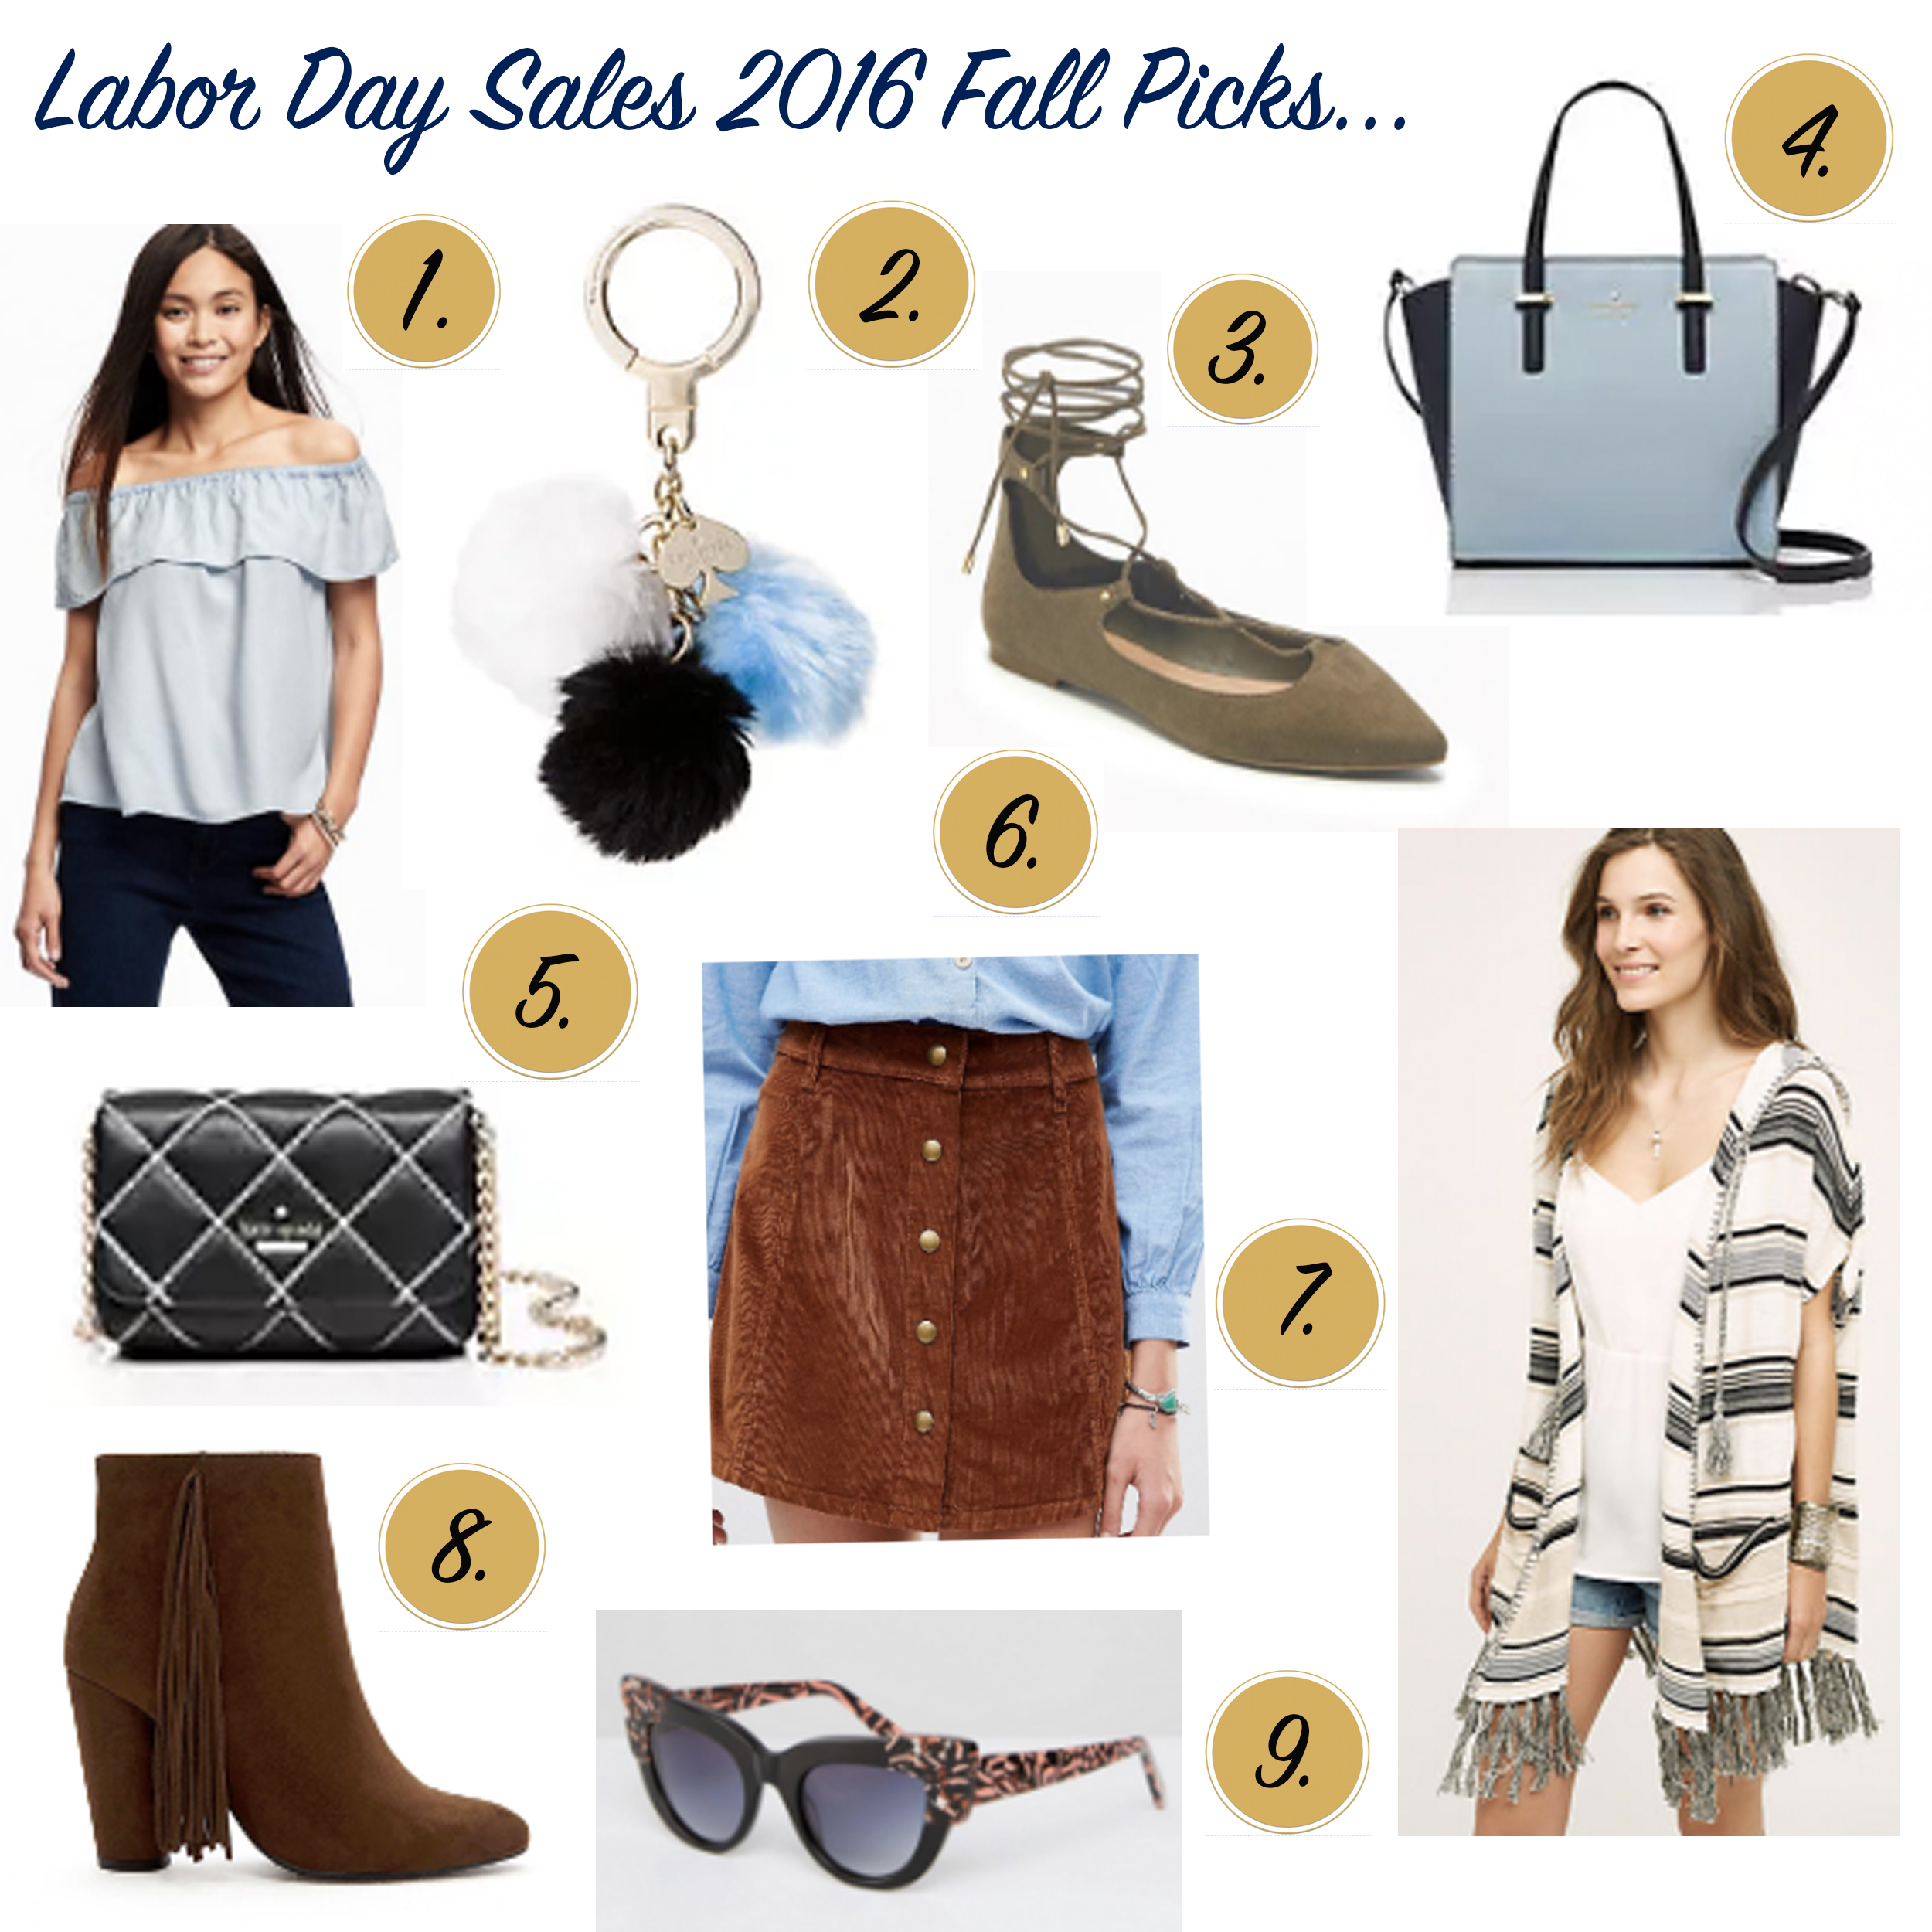 labor day sales 2016, labor day sales, fall style, la blogger, missyonmadison, melissa tierney, missy on madison, kate spade labor day sale, kate spade, anthropologie sale, anthropologie labor day sale, asos labor day sale, asos sale, forever 21 sale, forever 21 labor day sale, black quilted bag, button front skirt, asos sunglasses, old navy, ols navy cold shoulder top, old navy labor day sale, lace up flats, pom pom key chain, old navy flats, style blogger, style guide, fall style guide, fashion blogger,